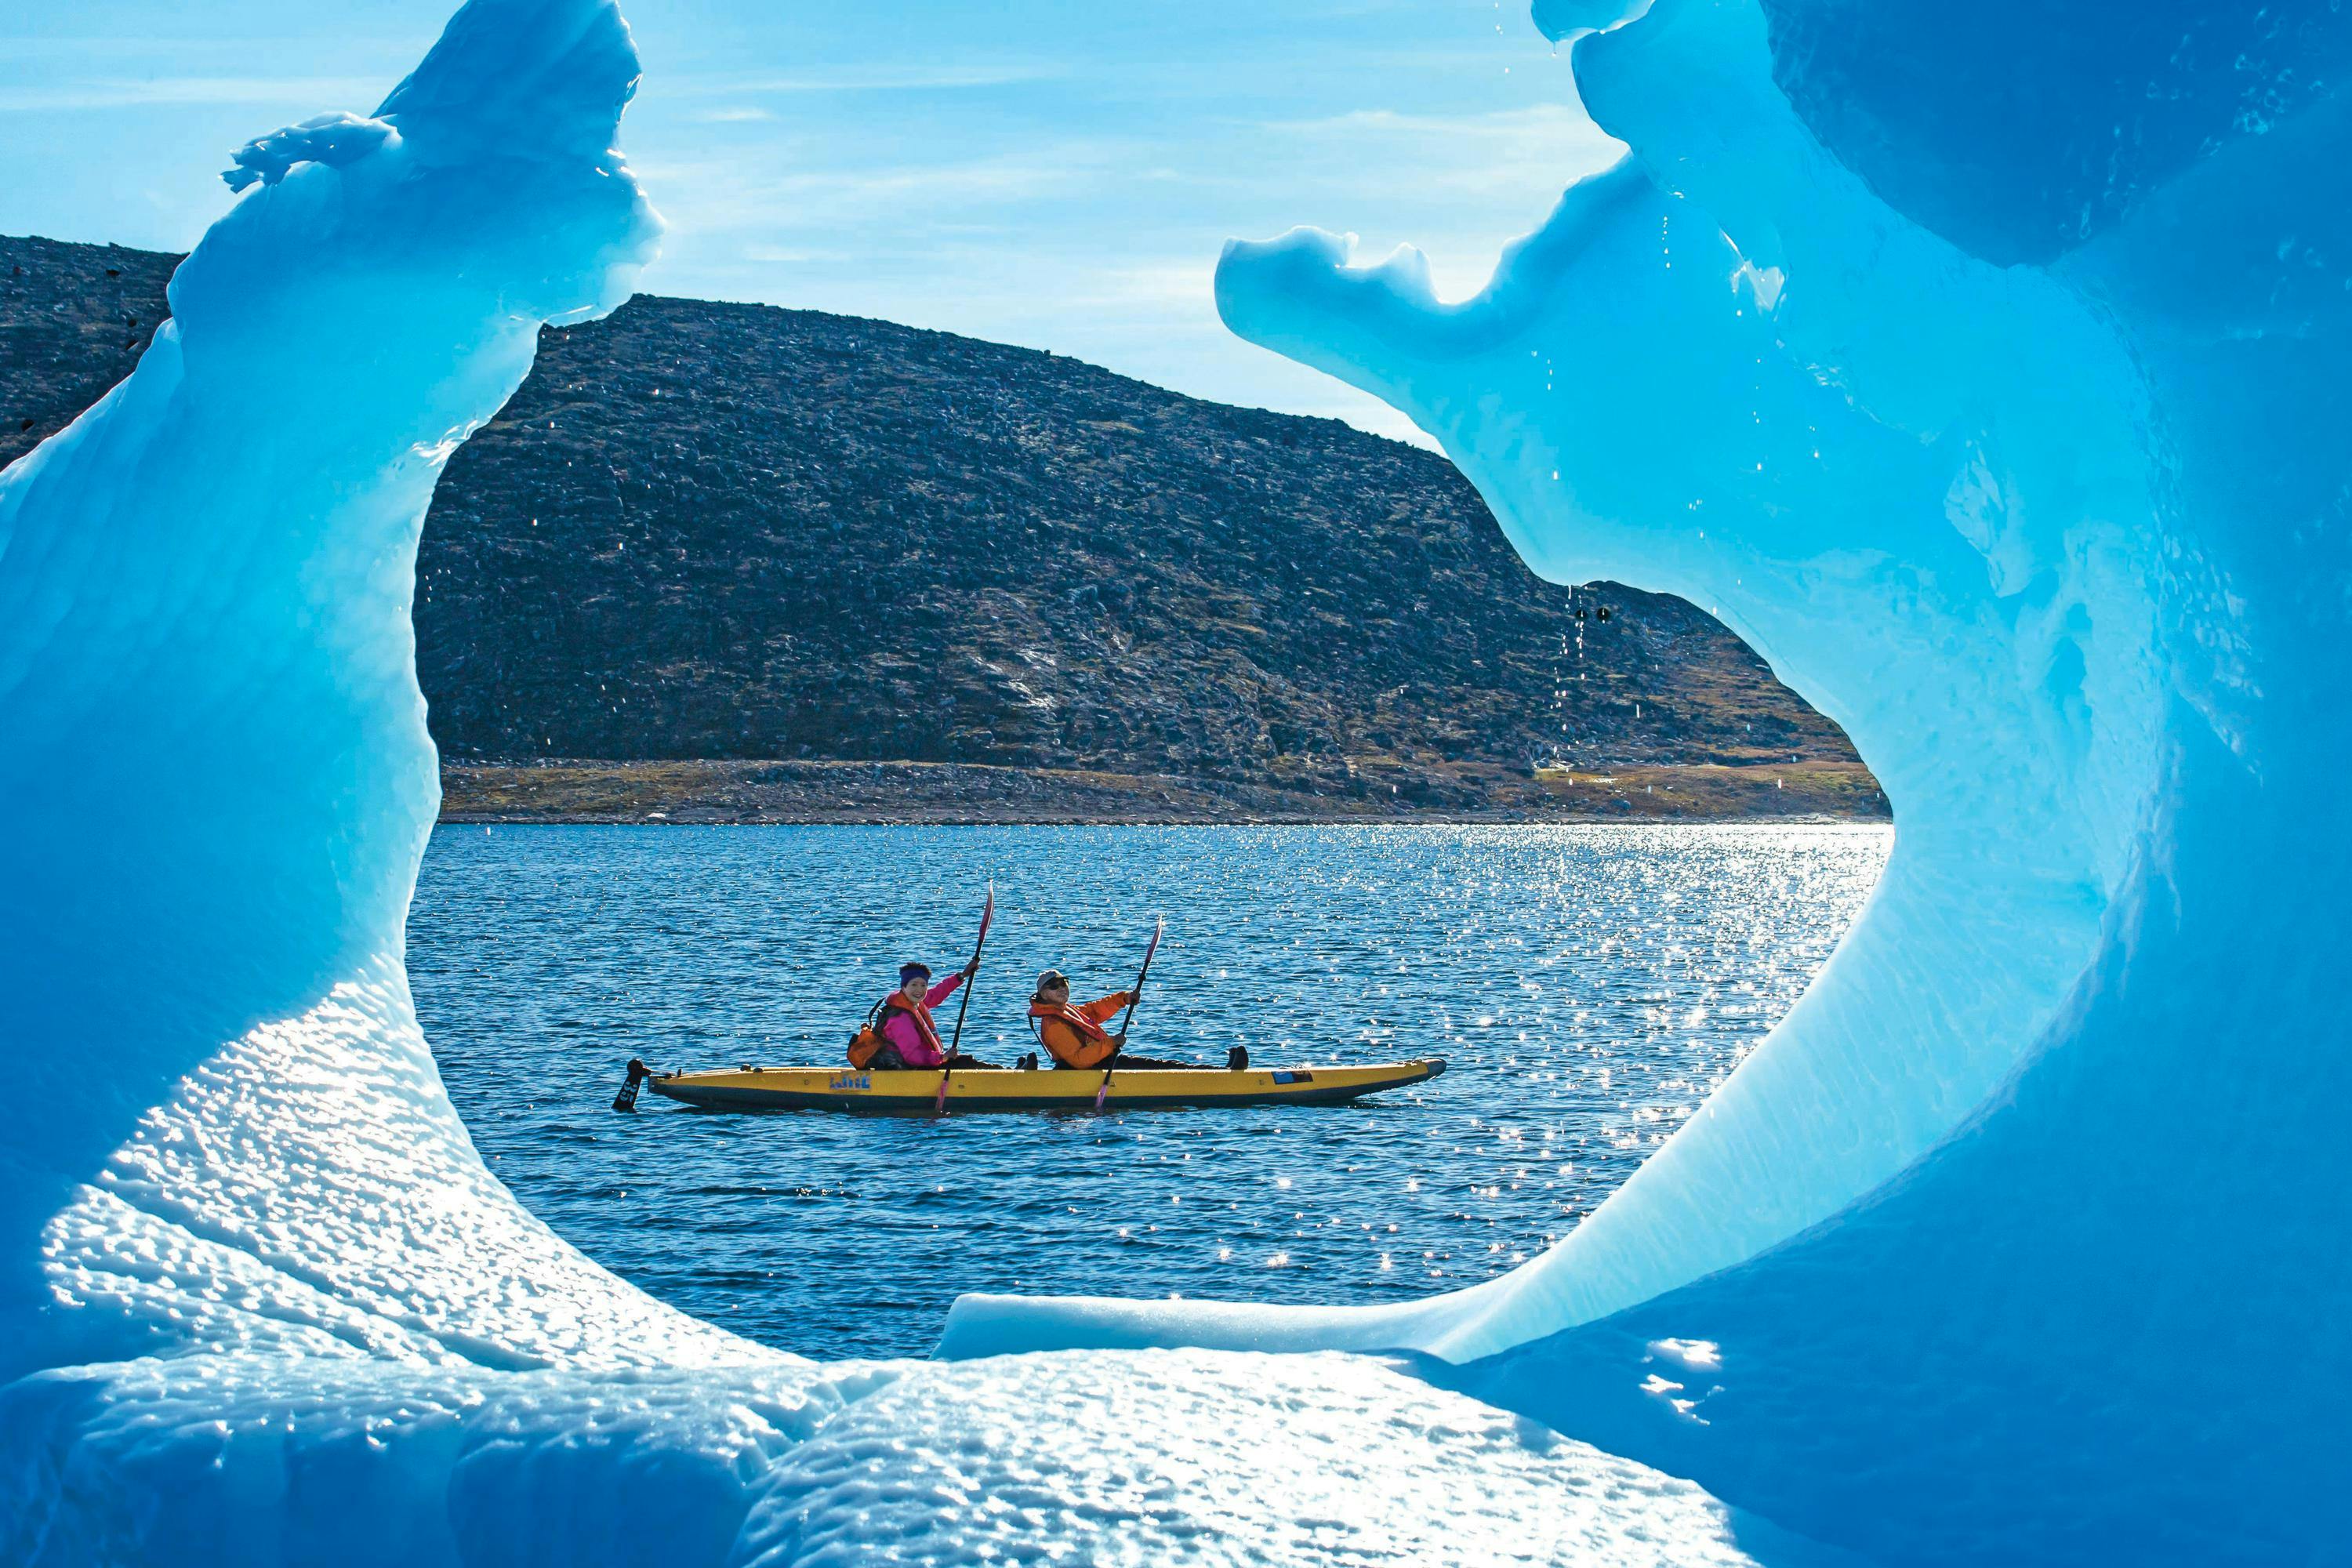 Guests exploring by kayak are framed by an Iceberg in Arctic Harbour, Baffin Bay, Baffin Island, Nunavut, Canada